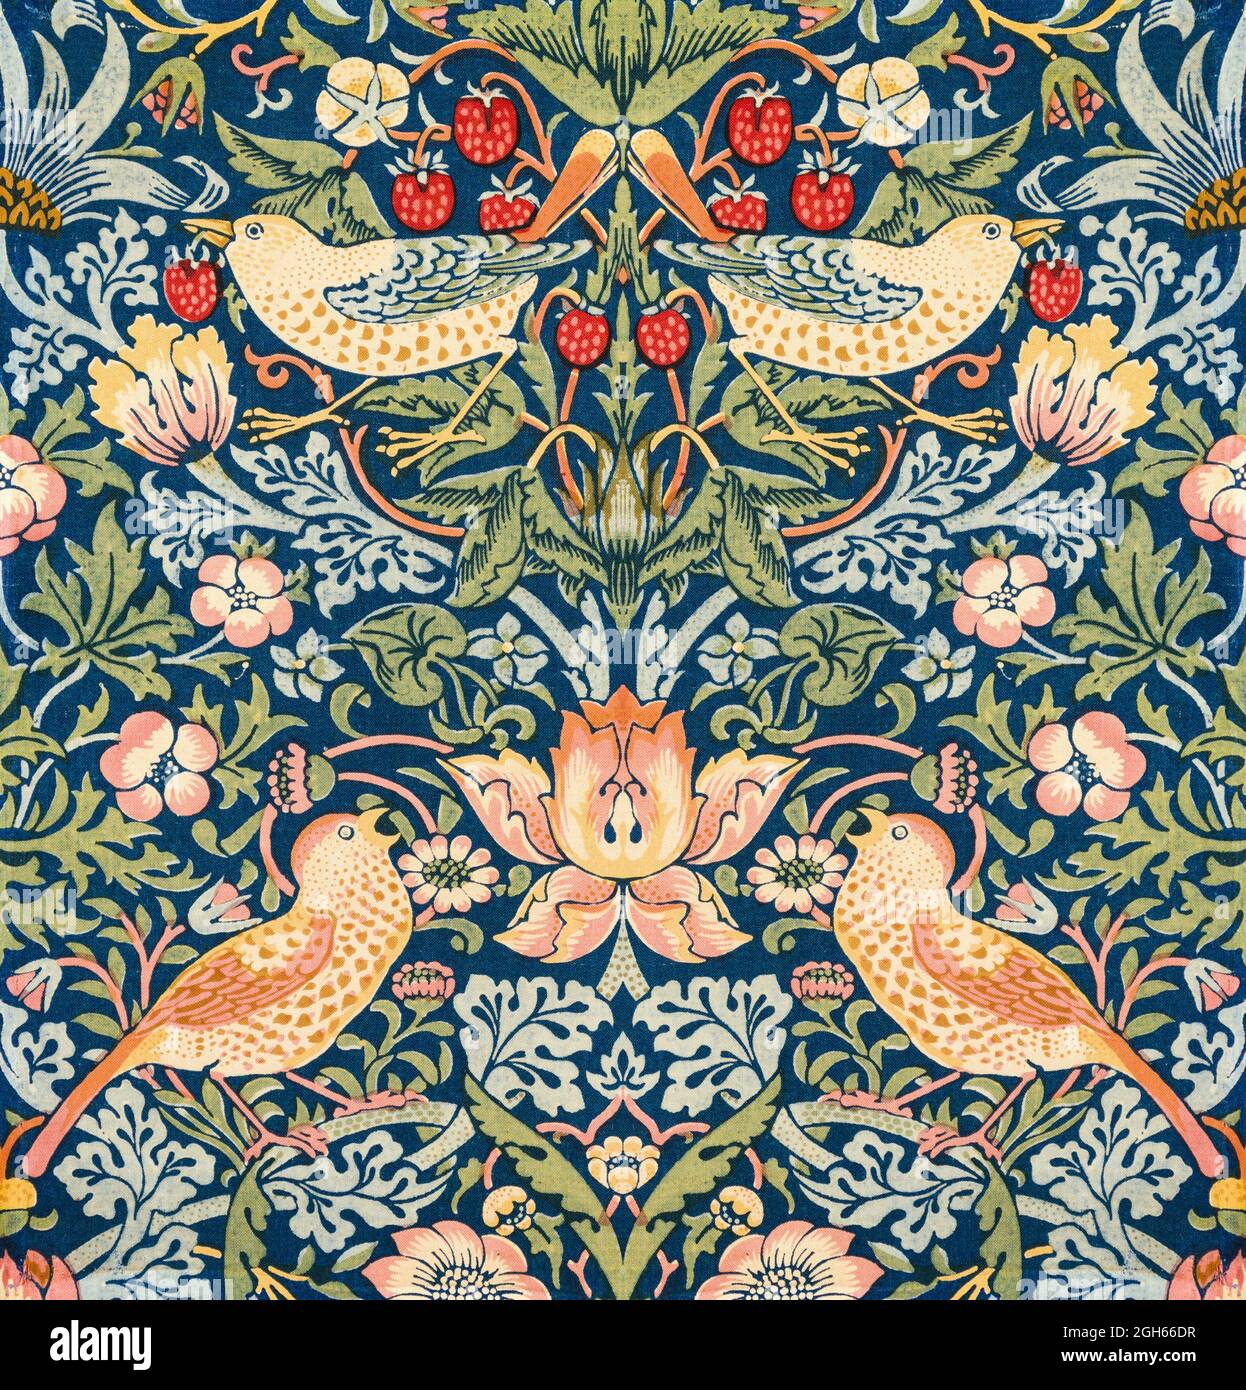 The strawberry thieves pattern (1883) by William Morris Stock Photo